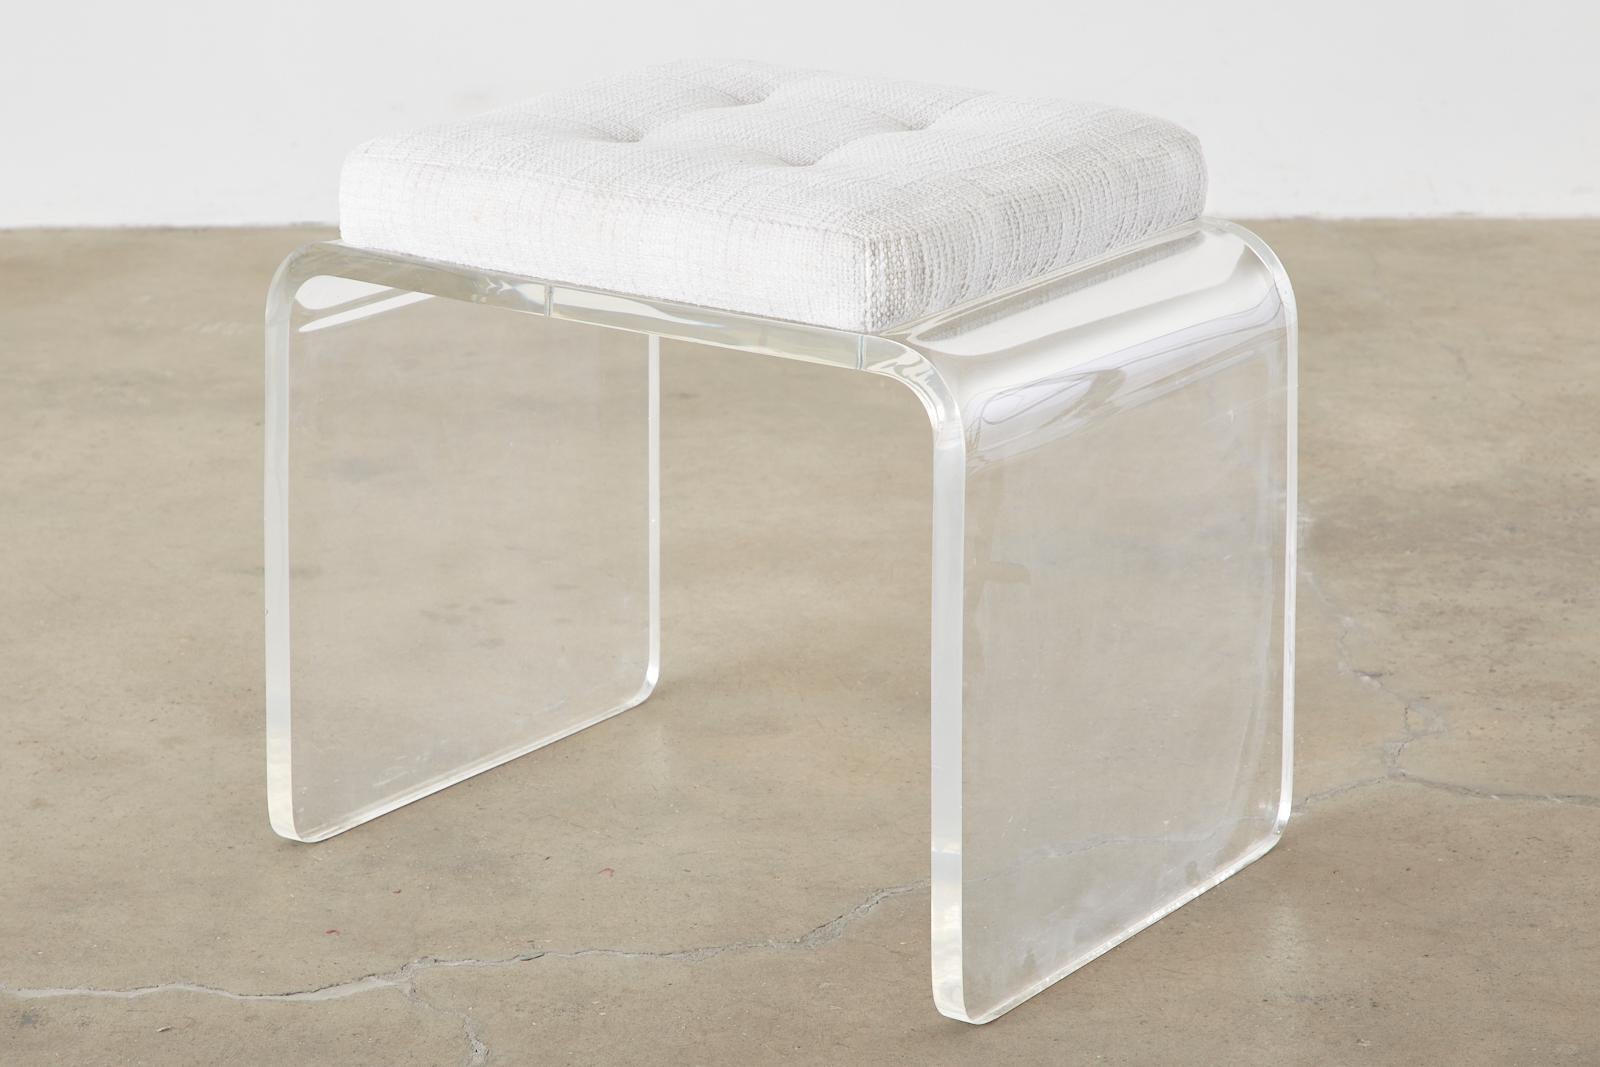 Stylish acrylic Lucite vanity bench or stool having a waterfall form. Features a white Hollywood Regency style upholstered cushion in a white linen material with a subtle tufting. Constructed from Lucite 1 inch thick and bent on the ends to form the